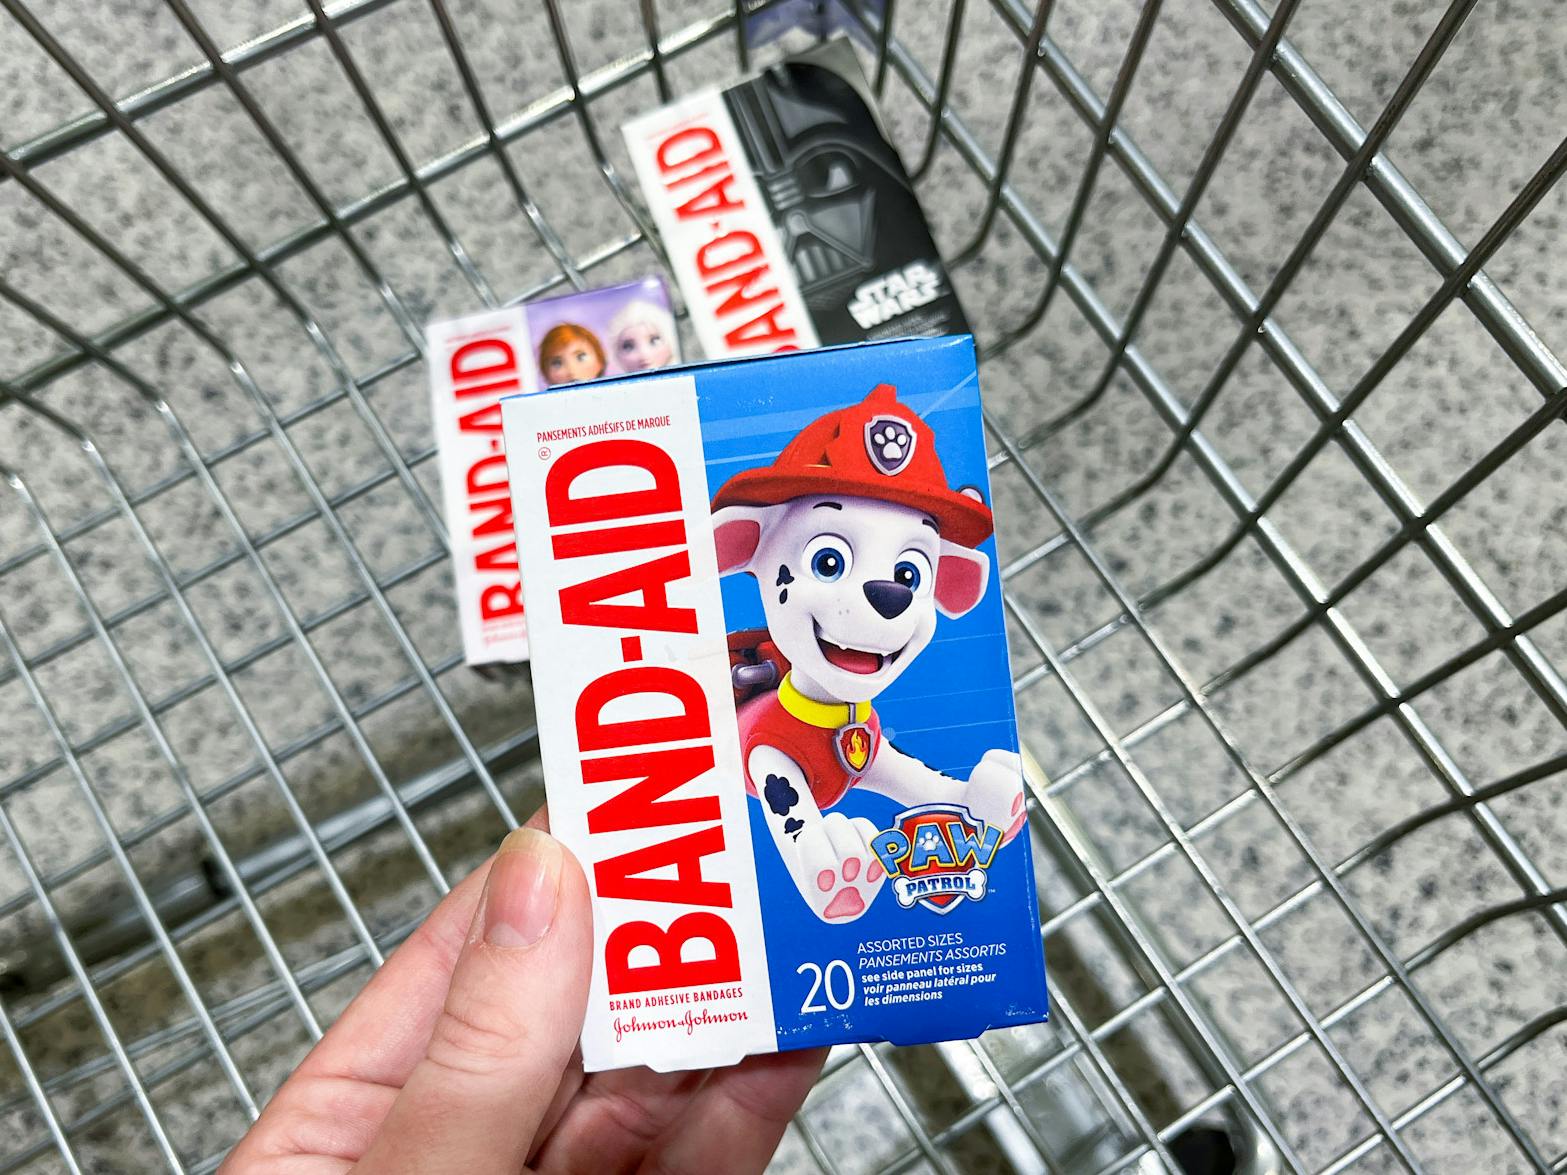 A person's hand holding a box of Paw Patrol themed Band-Aids above some Star Wars and Frozen themed Band-Aids in a shopping cart.